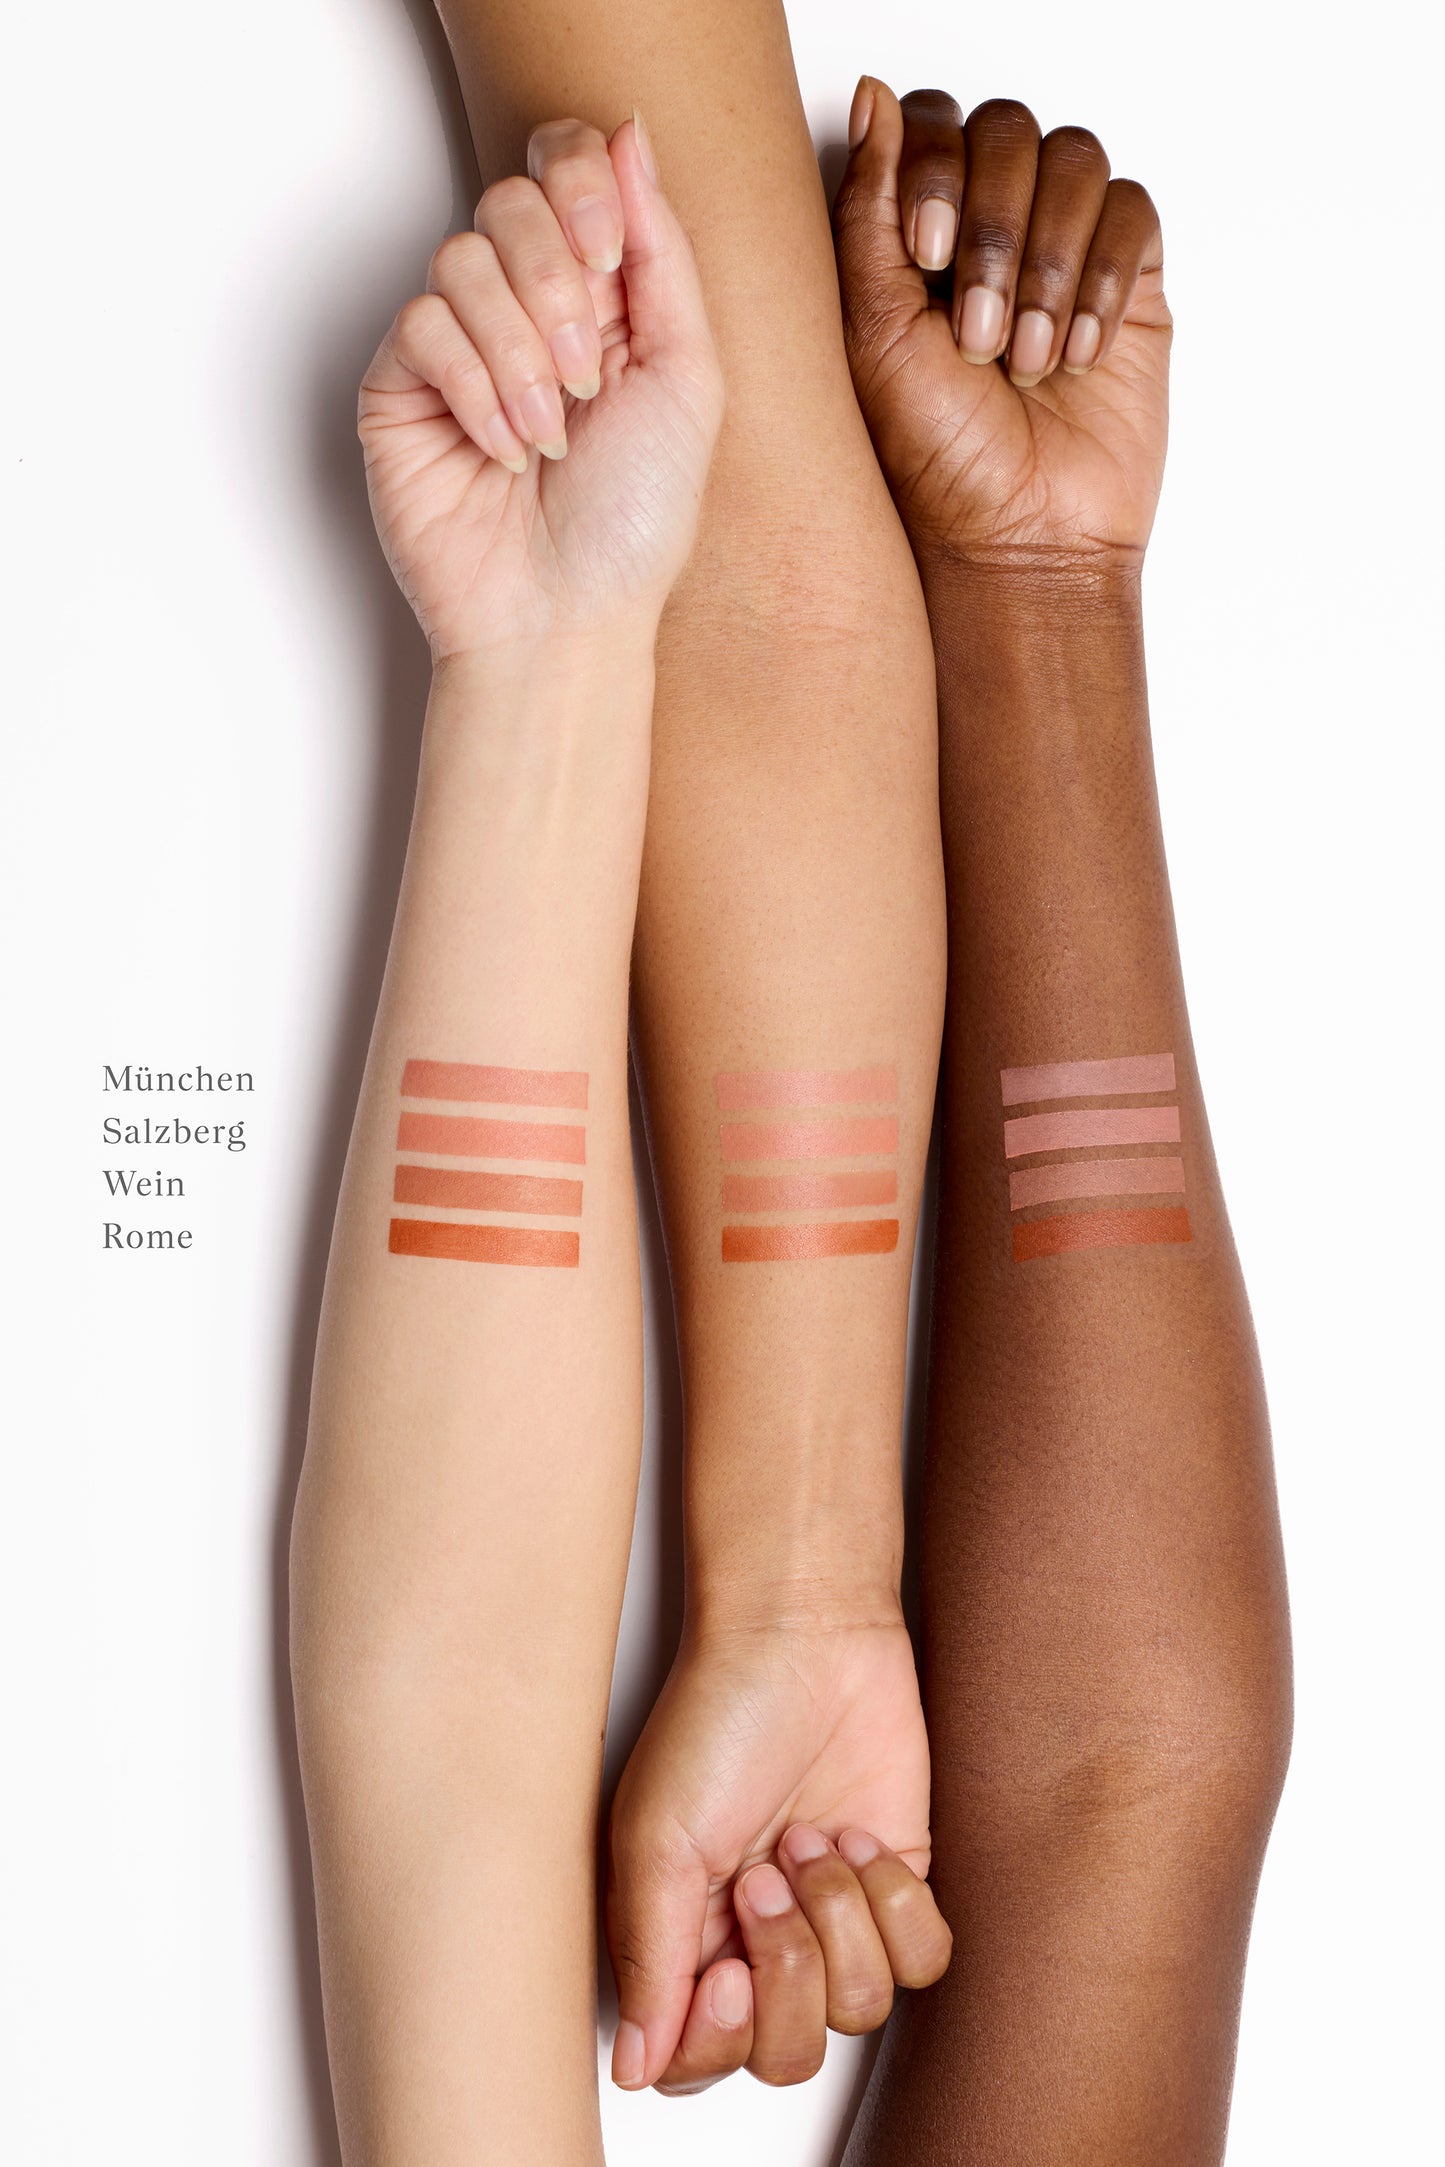 Three arms lined up next to each other with liquid blush swatches on the skin.  There are four swatch stripes on each of the three arms. The arm on the left is fair, the middle is golden and the arm on the right is deep. Their nails are unpainted and their hands are semi-closed in a relaxed state.